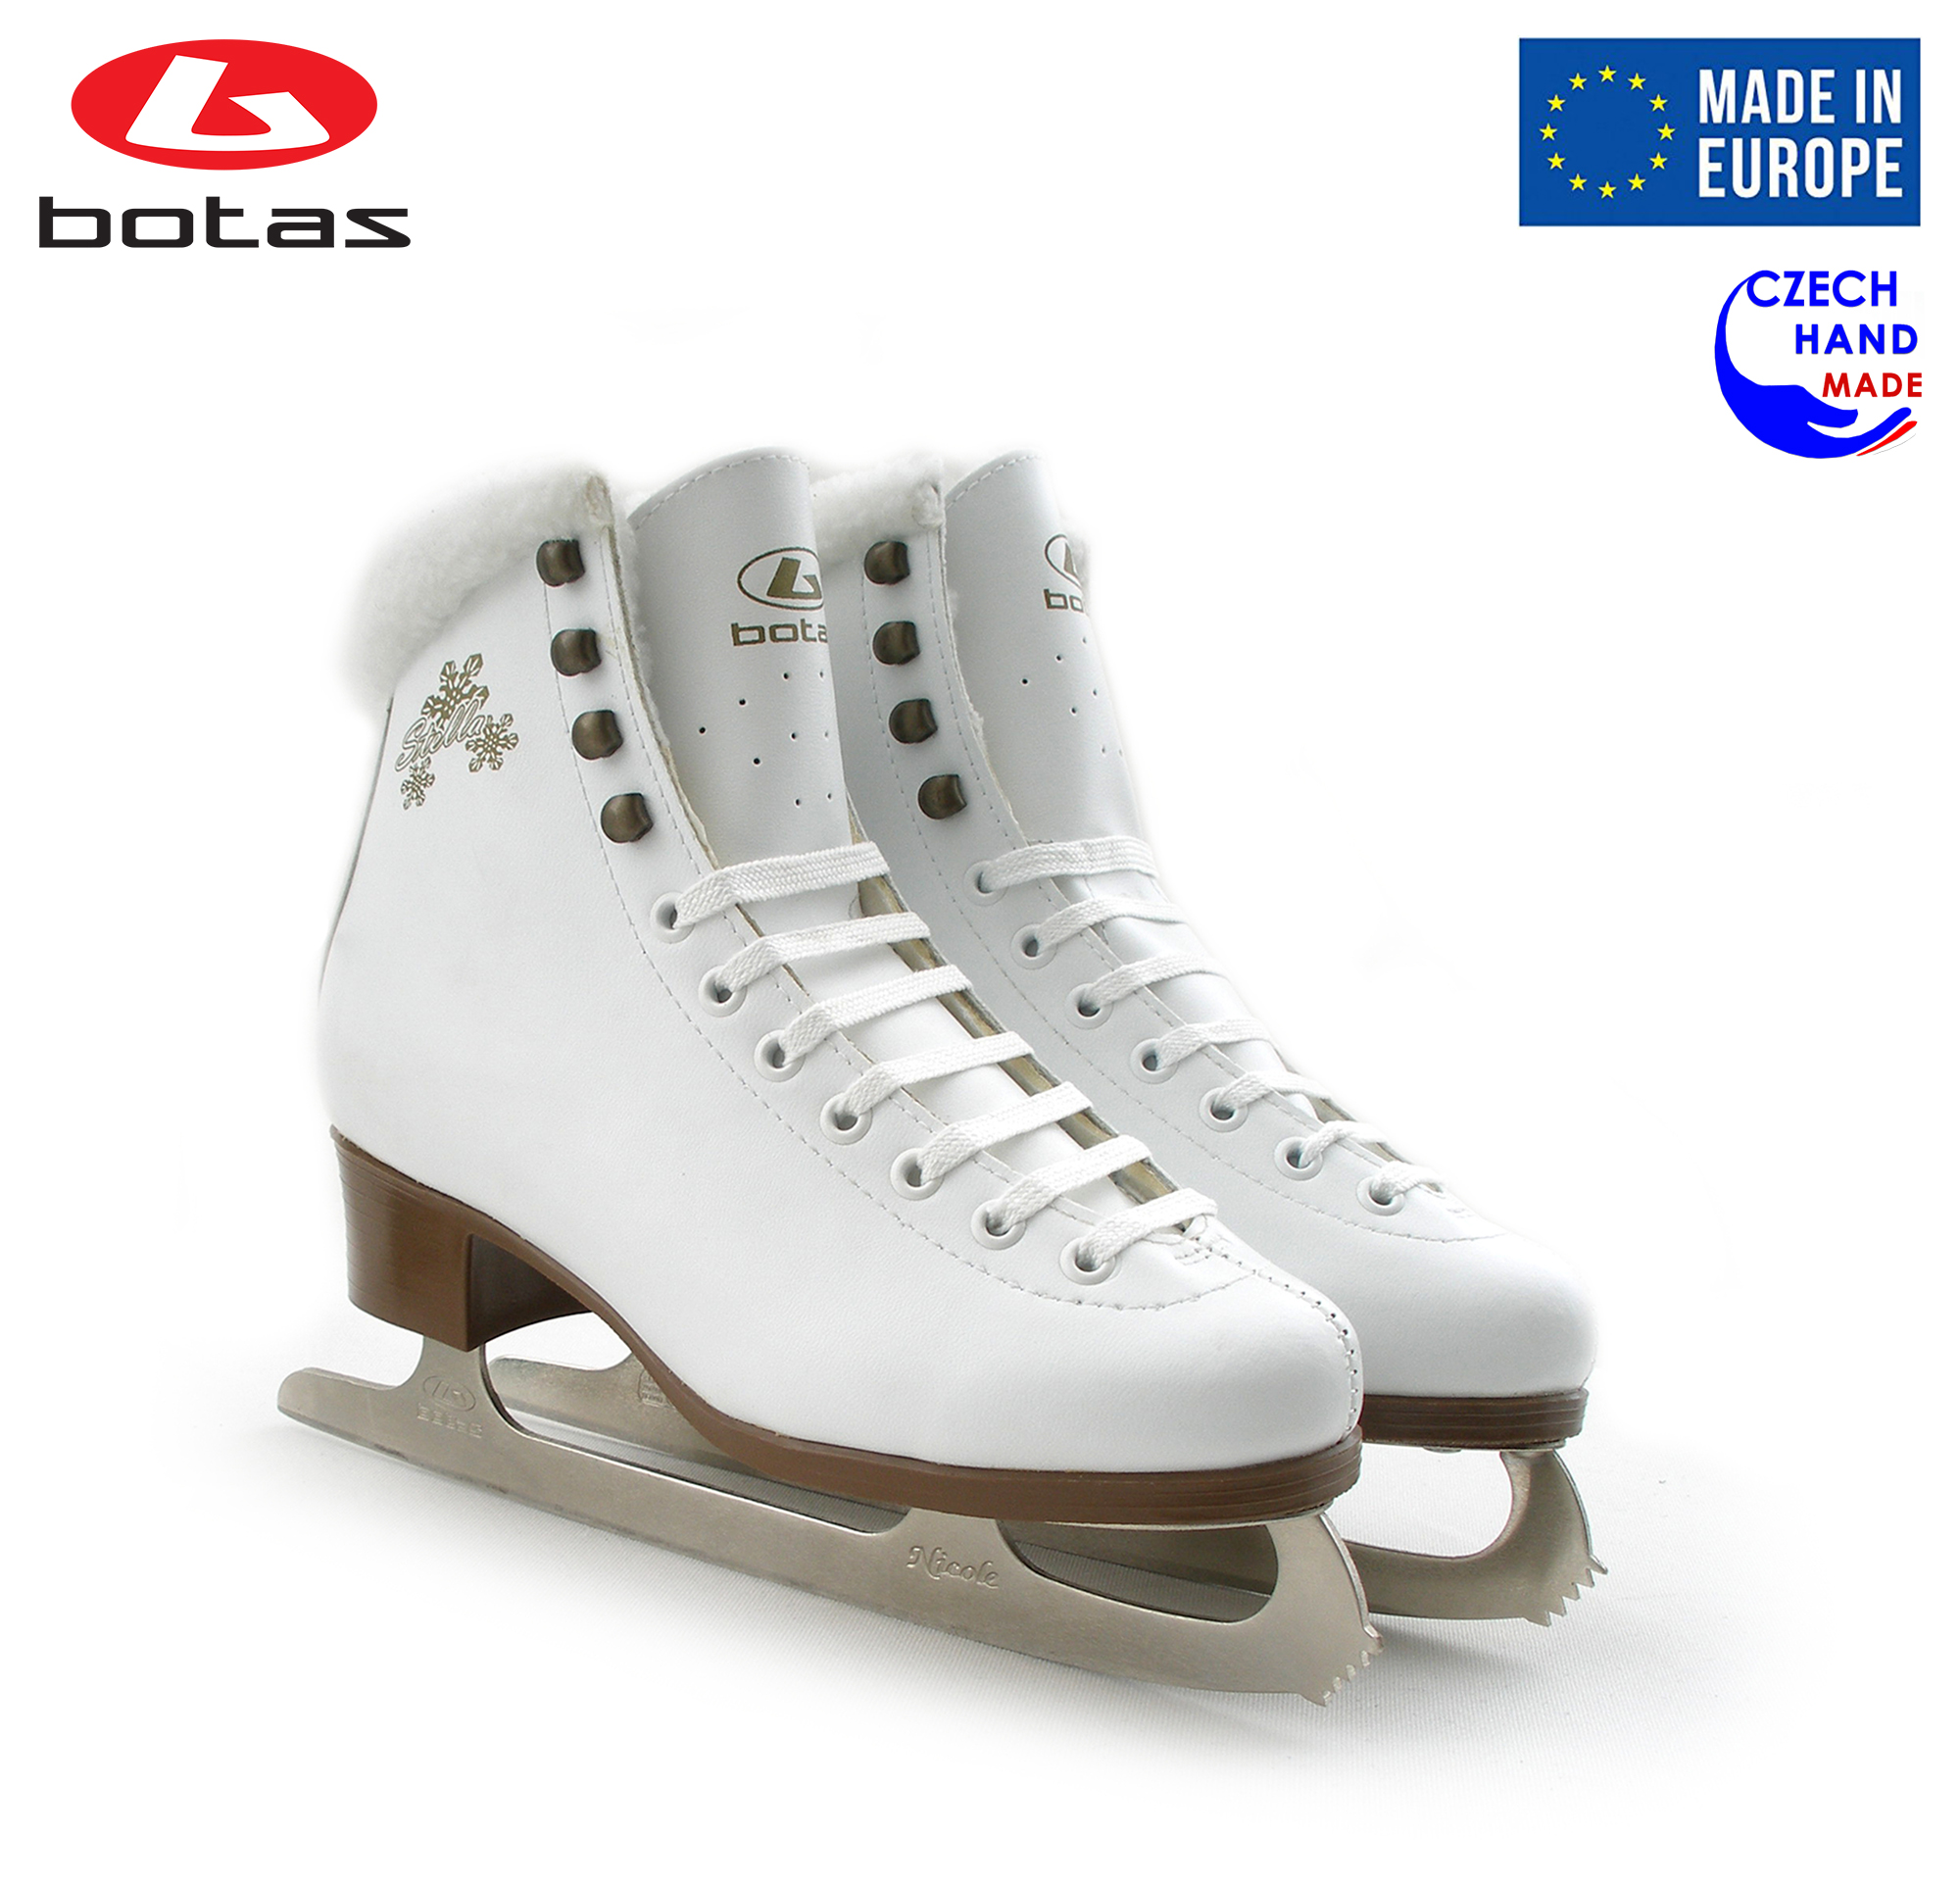 BOTAS - model: STELLA / Made in Europe (Czech Republic) / Innovated Elegant Figure Ice Skates for Girls, Kids / with Plush Collar / NICOLE blades / Color: White, Size: Kids 10 - image 4 of 6